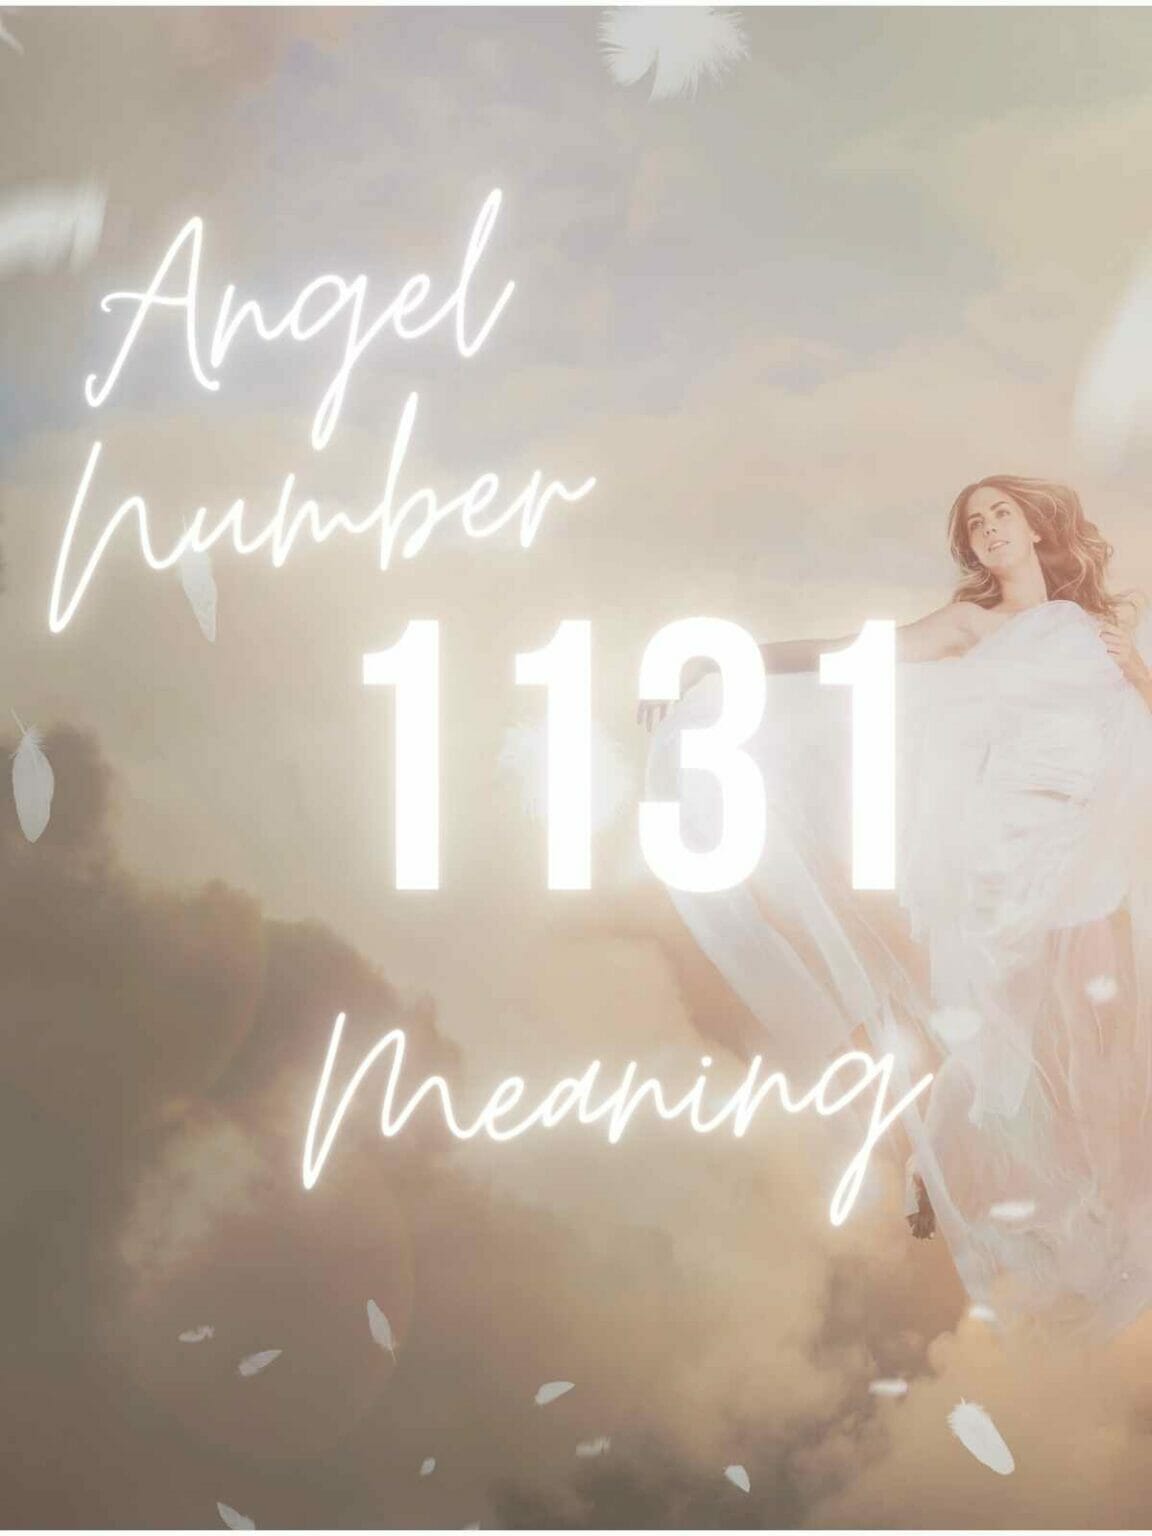 1131 meaning